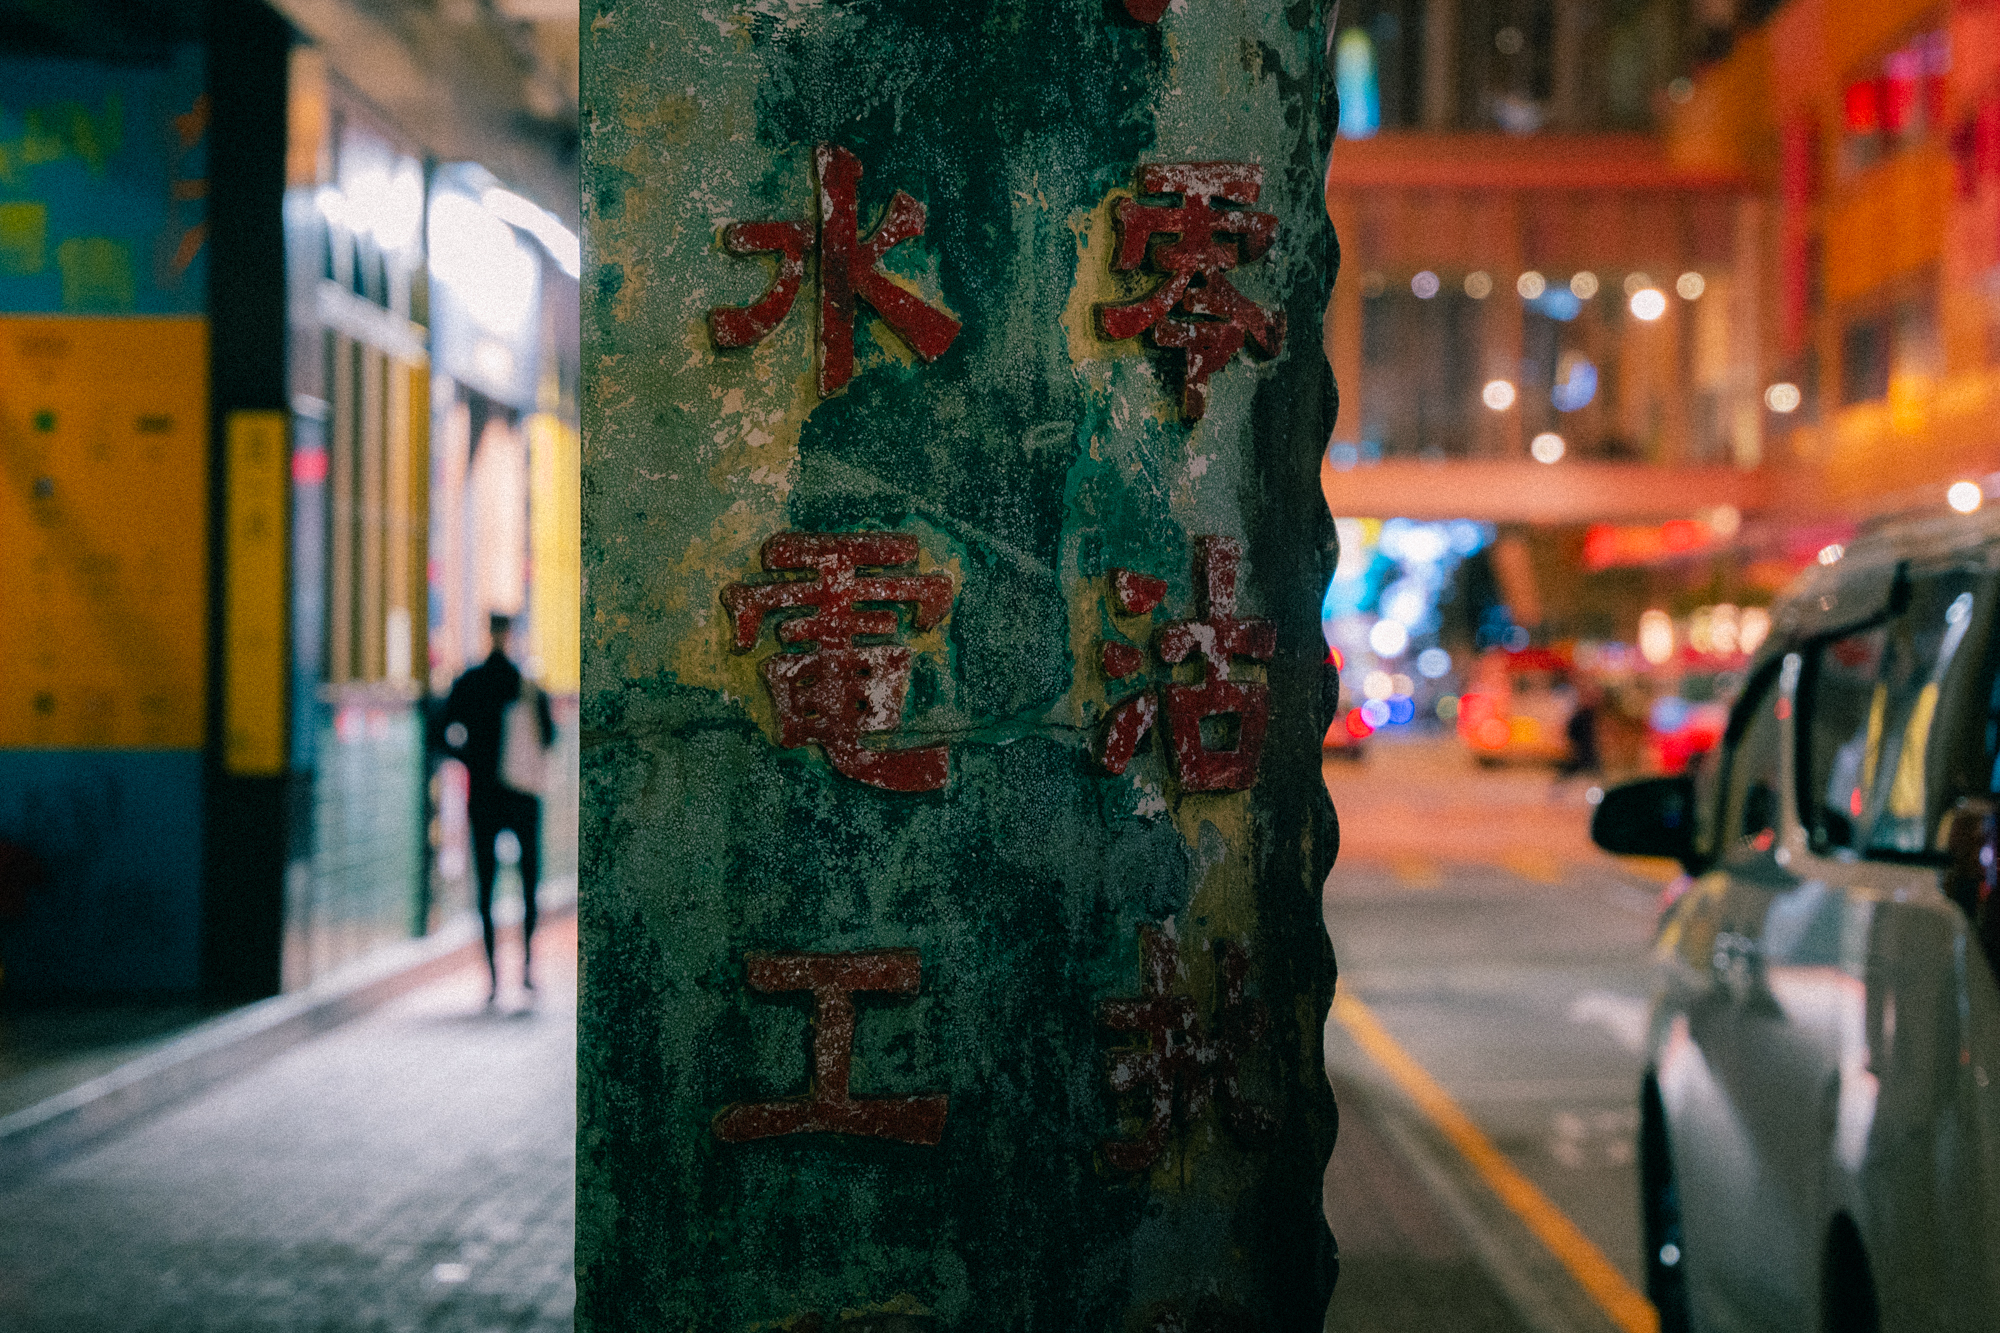 Explore West Kowloon, a captivating blend of historic and modern aspects of Hong Kong. Enjoy a different pace of the city that is rich in culture.